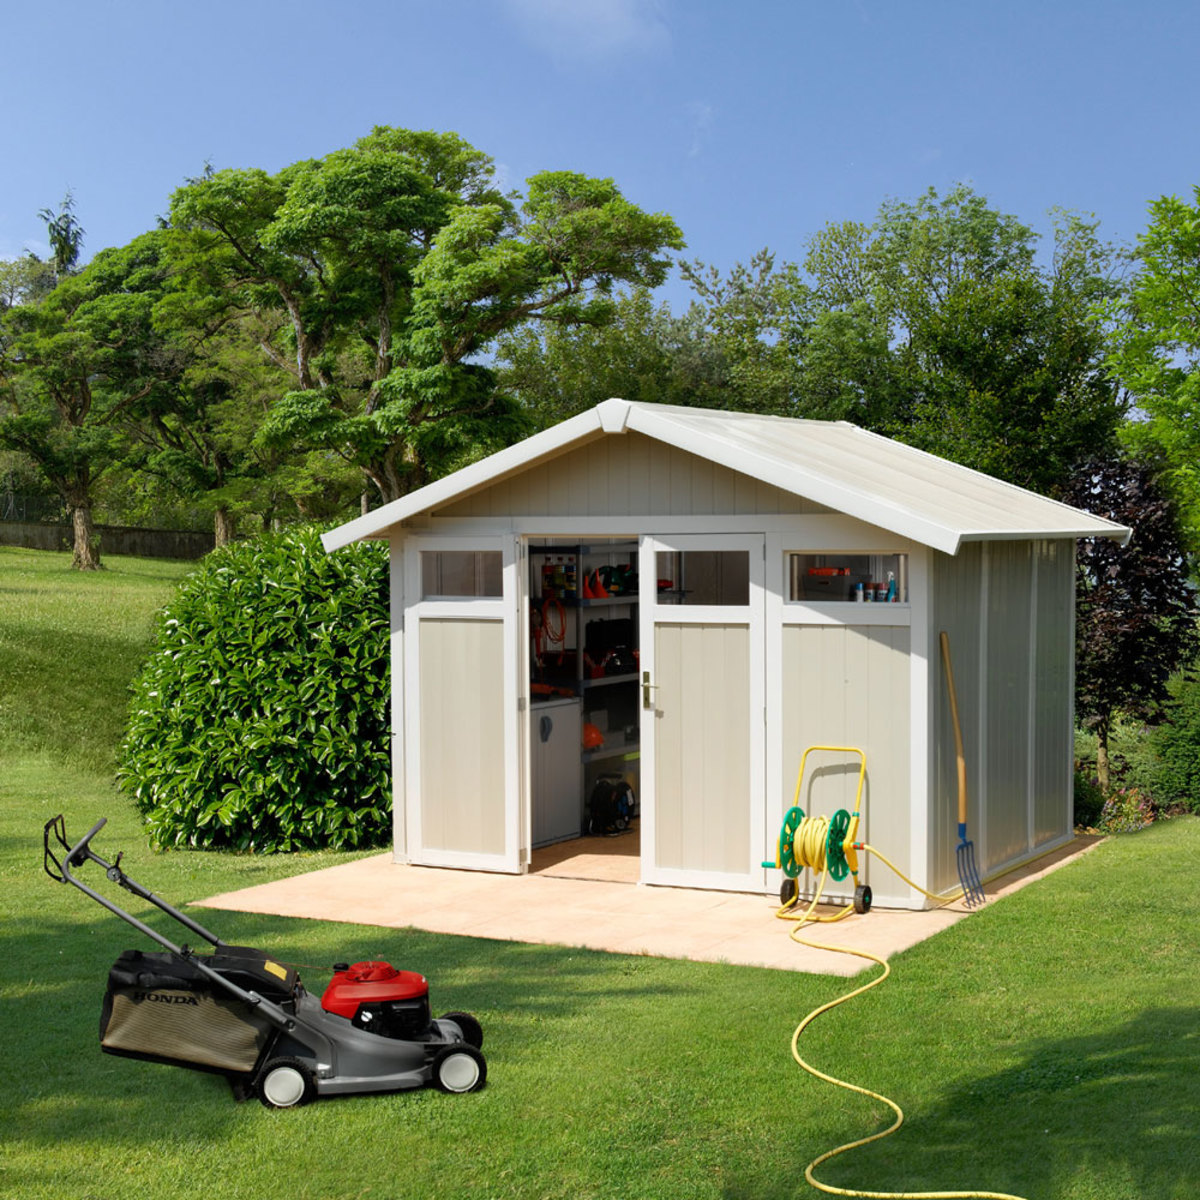 Grosfillex Utility 10ft 2" x 7ft 9" (3.1 x 2.4m) Shed in Green/White - Model Utility 7.5